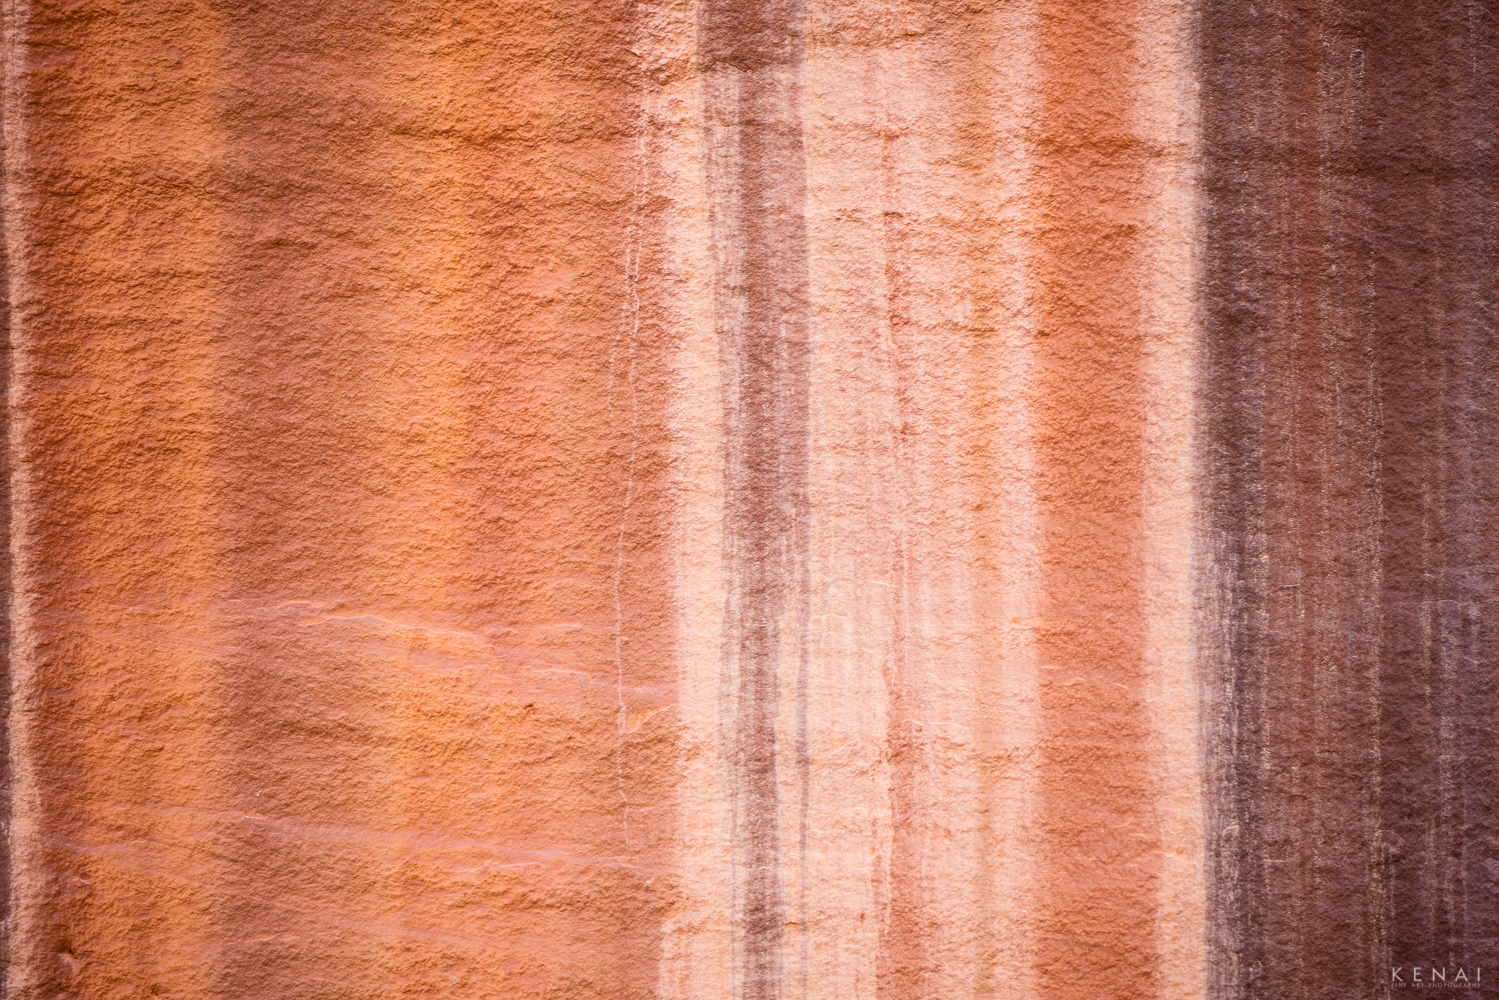 Colorful lines in this abstract photo of the walls of the Great Wash, Capital Reef Utah.